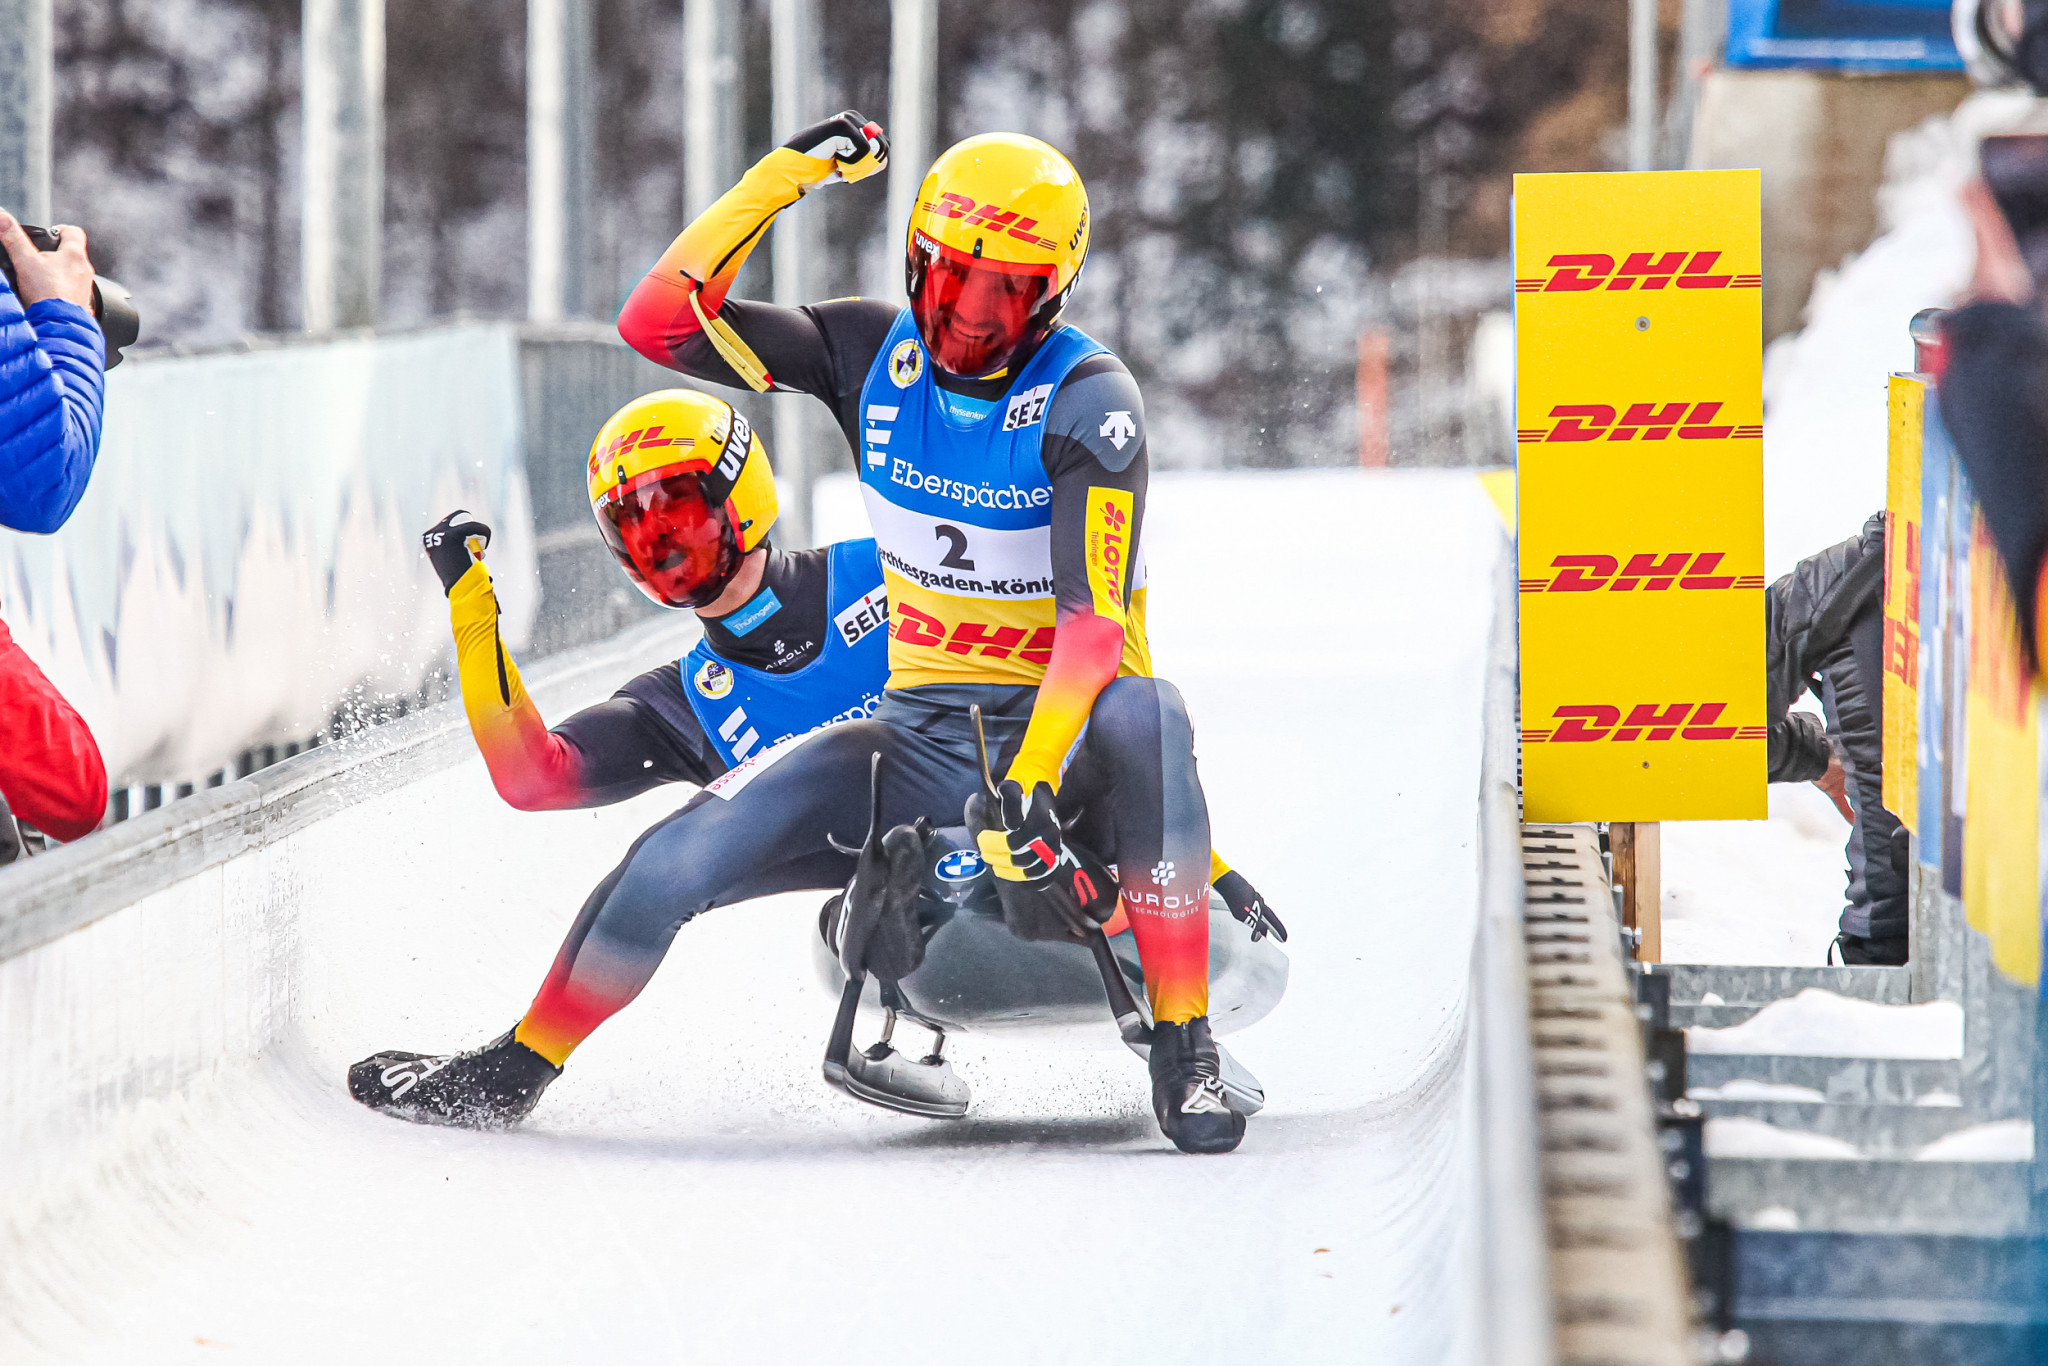 German pair Toni Eggert and Sascha Benecken triumphed in the doubles event at the Luge World Championships ©FIL